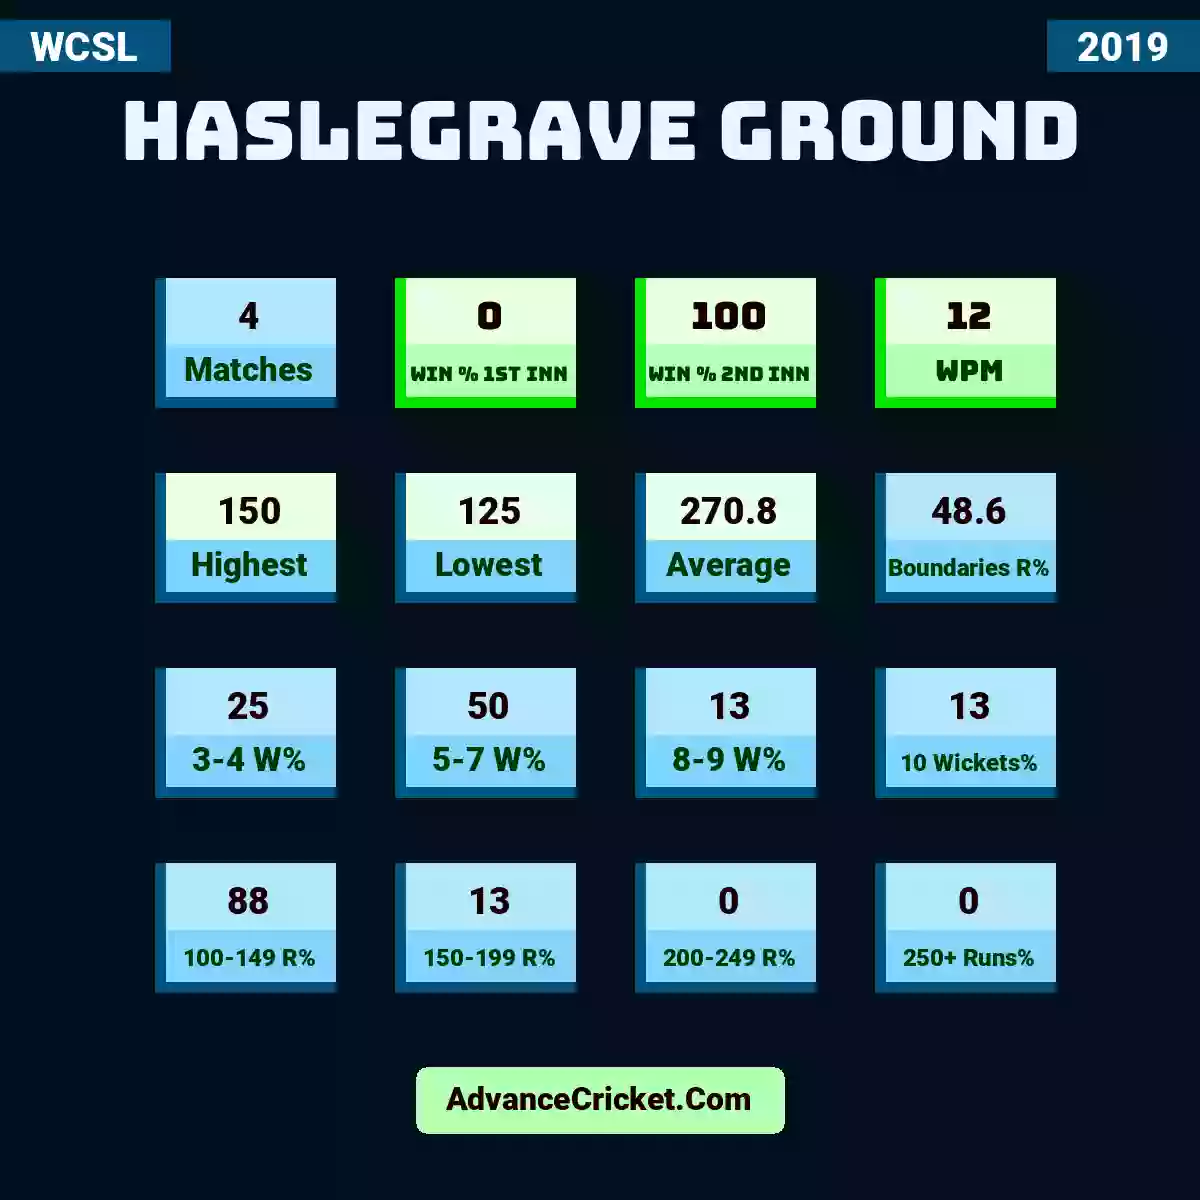 Image showing Haslegrave Ground with Matches: 4, Win % 1st Inn: 0, Win % 2nd Inn: 100, WPM: 12, Highest: 150, Lowest: 125, Average: 270.8, Boundaries R%: 48.6, 3-4 W%: 25, 5-7 W%: 50, 8-9 W%: 13, 10 Wickets%: 13, 100-149 R%: 88, 150-199 R%: 13, 200-249 R%: 0, 250+ Runs%: 0.